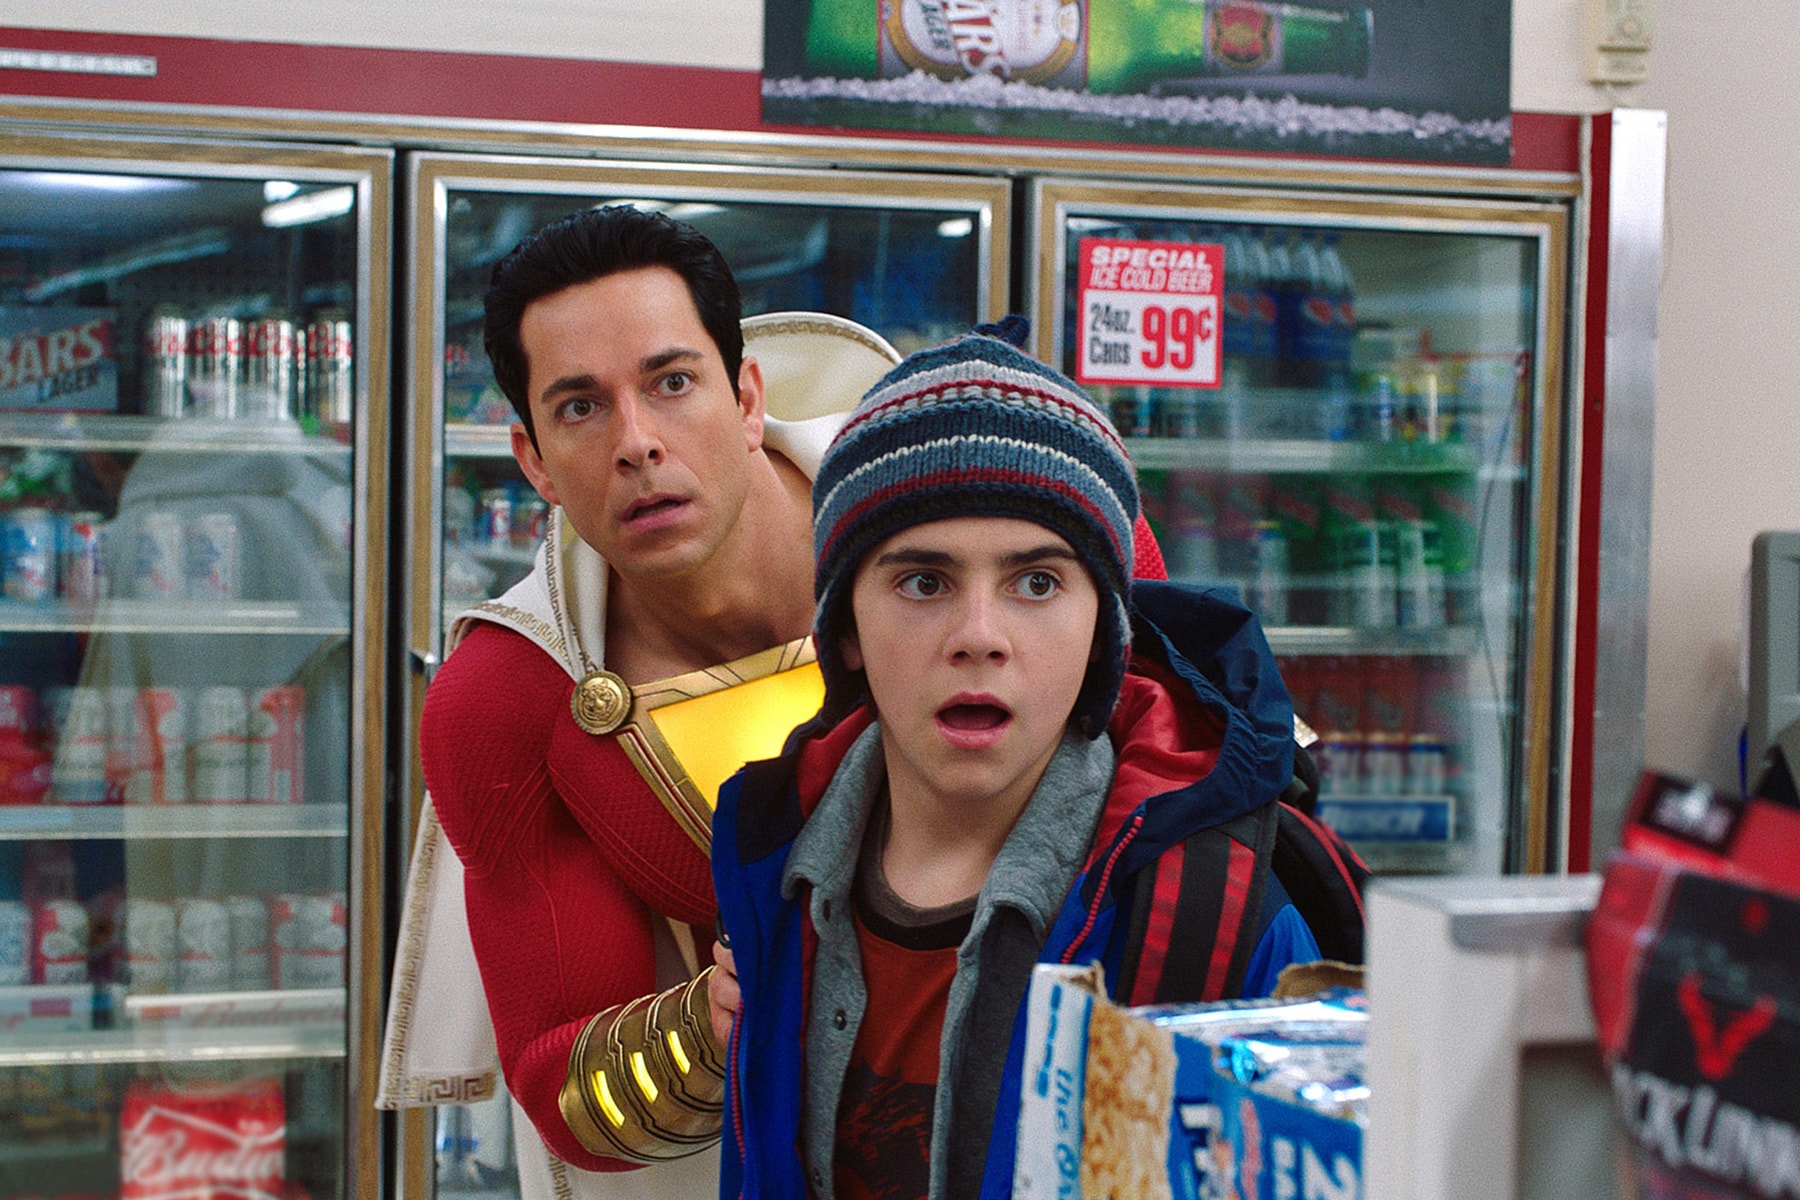 DC's 'Shazam 2' Gets a Release Date 2022 april dc extended universe warner bros. films movies comics  Zachary Levi superheroes 